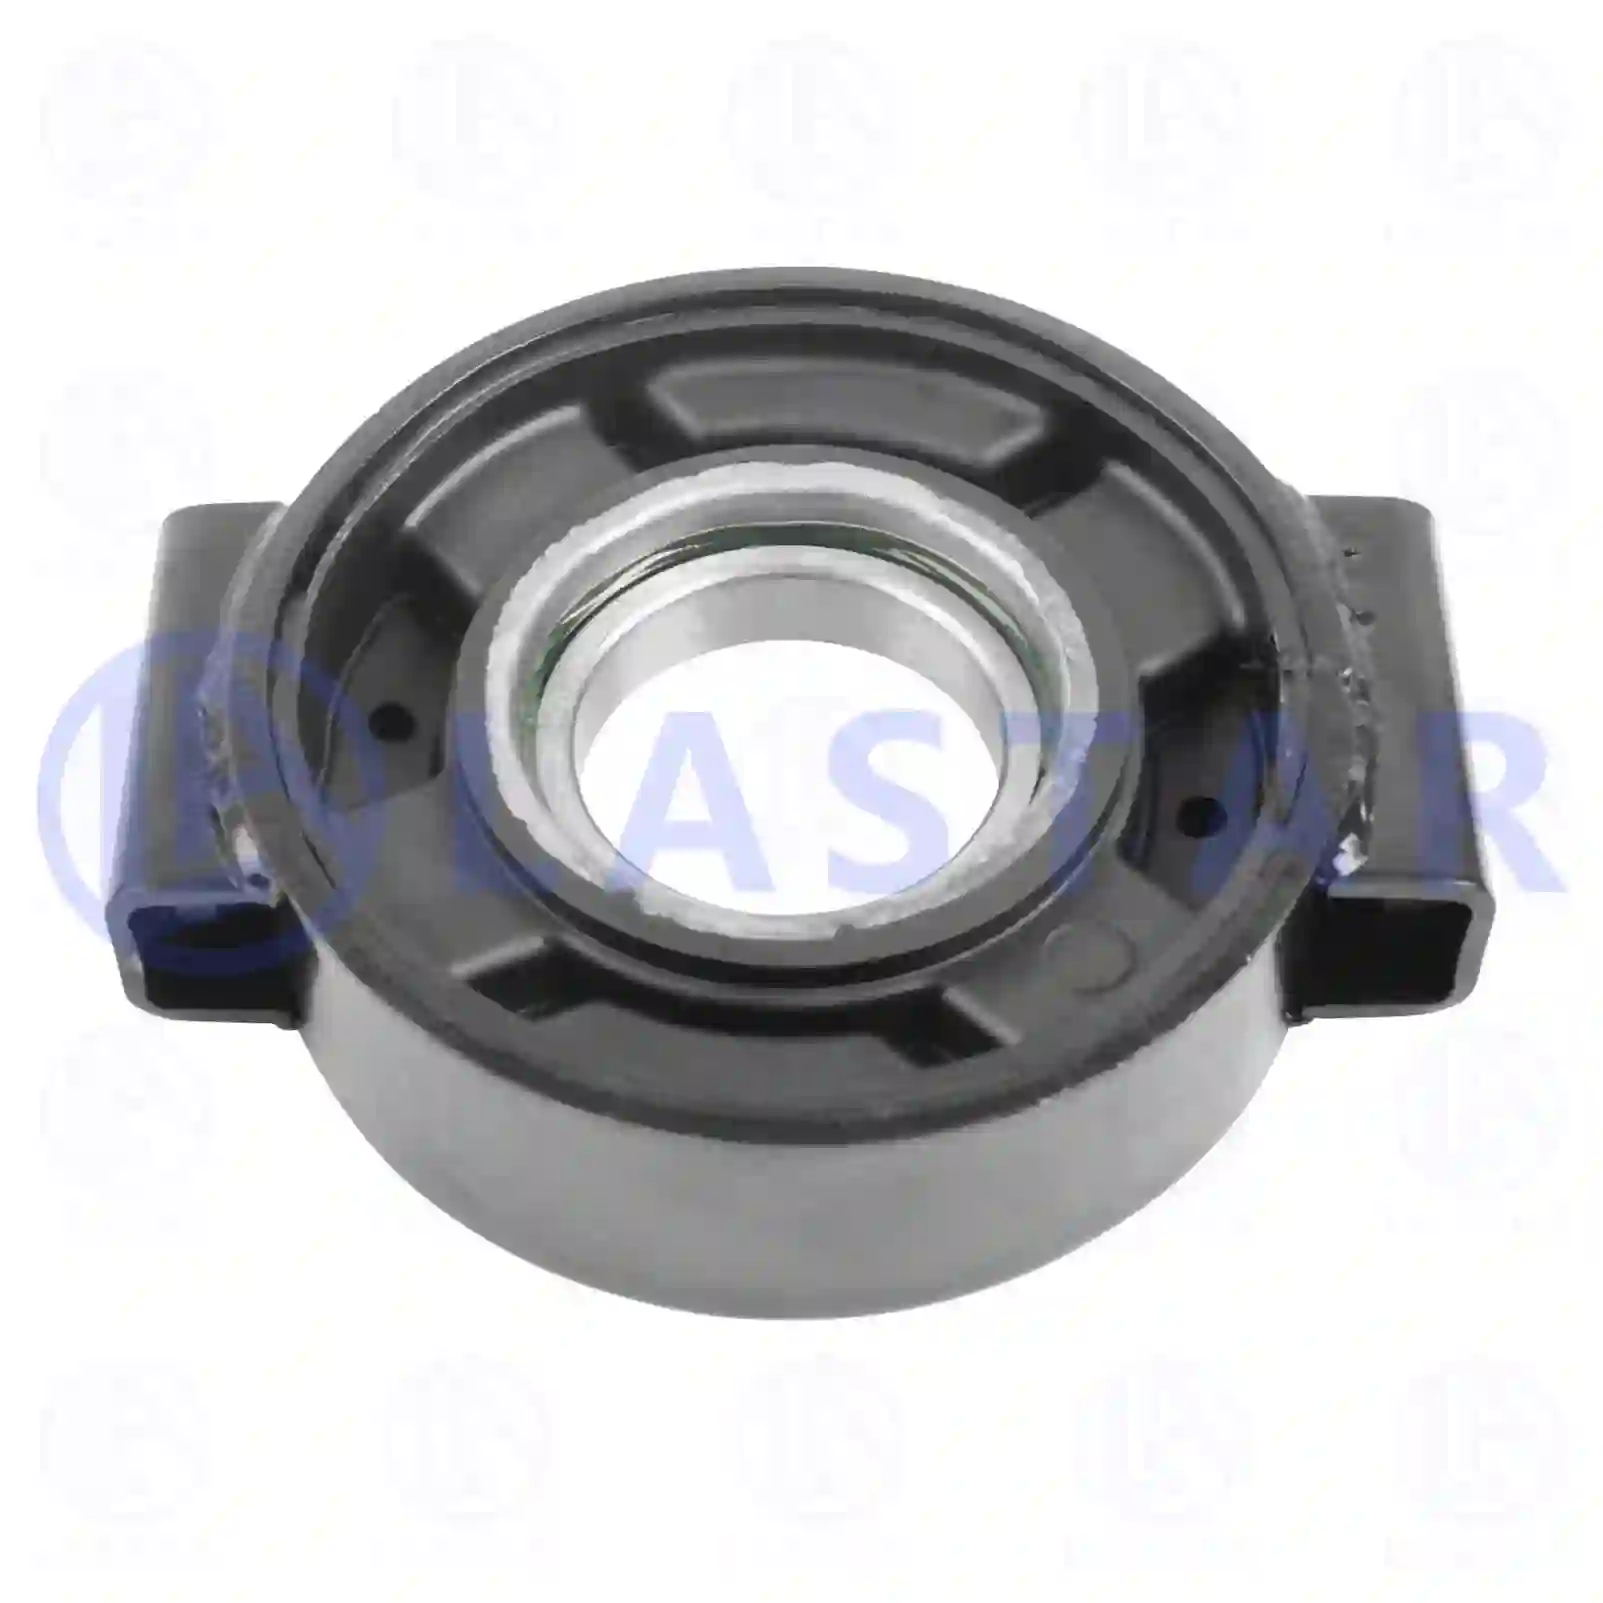 Support Bearing Center bearing, la no: 77734261 ,  oem no:4004110112, 65941 Lastar Spare Part | Truck Spare Parts, Auotomotive Spare Parts